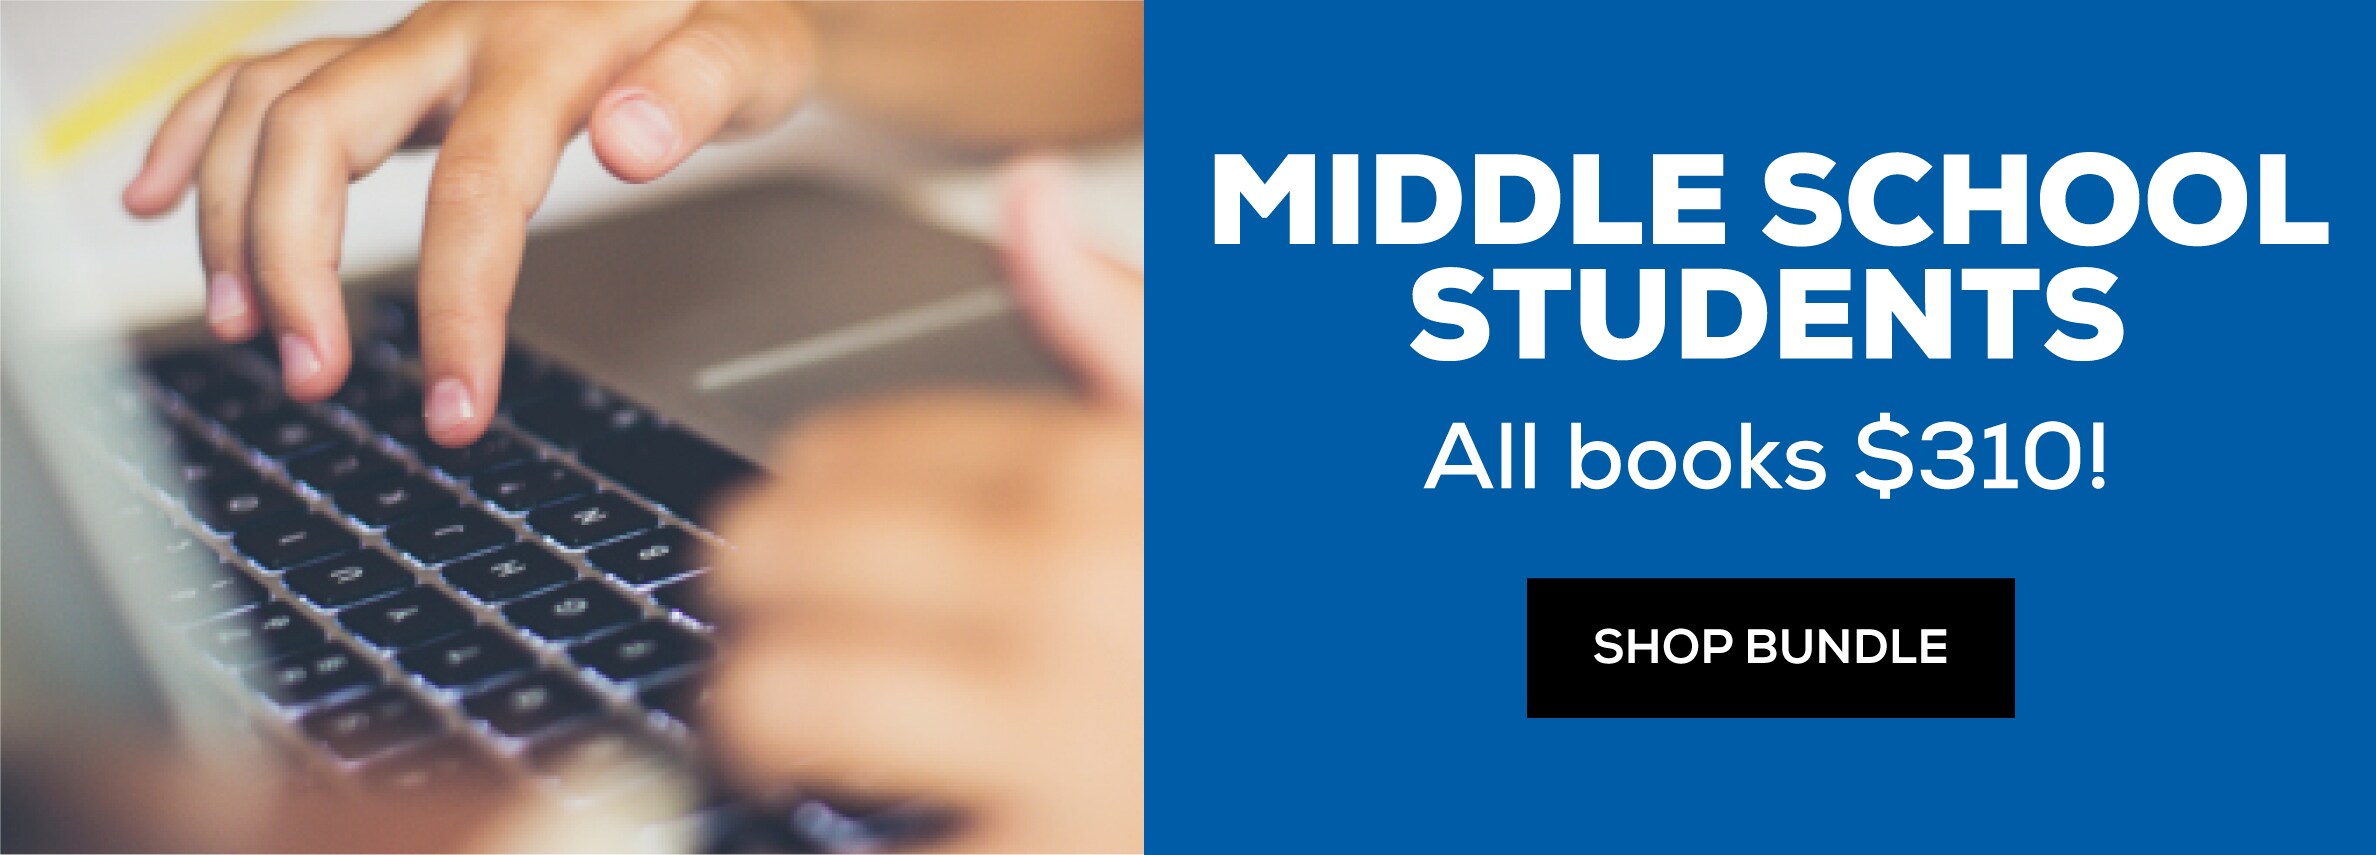 Middle School Students - Bundle All Books $310